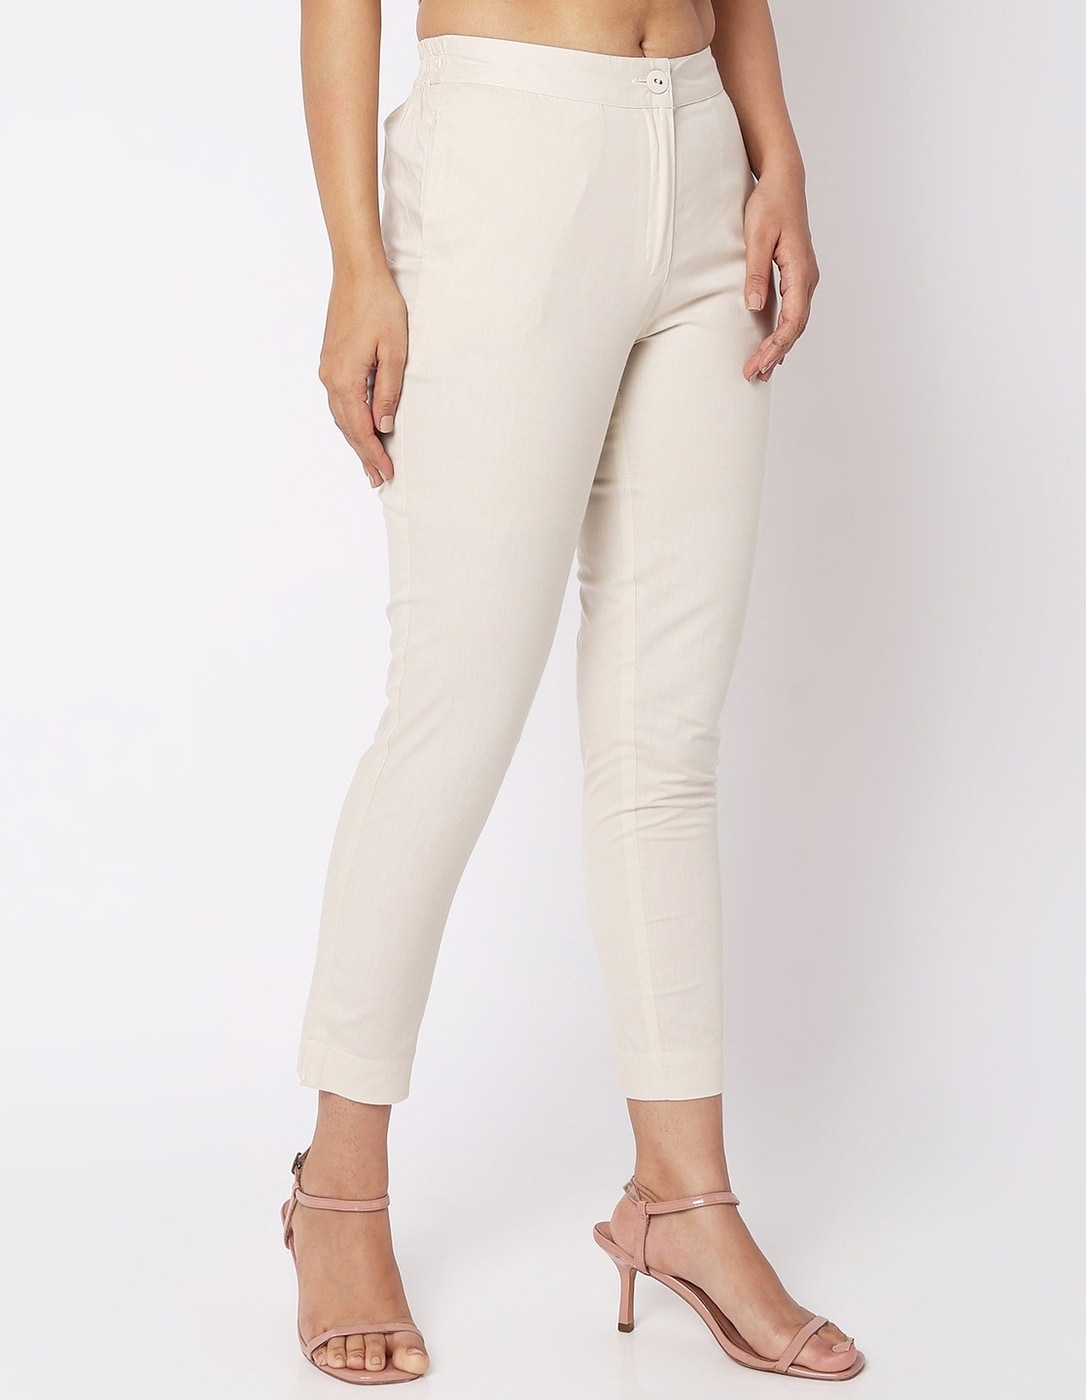 City Fashion Regular Fit Women Cream Trousers - Buy City Fashion Regular  Fit Women Cream Trousers Online at Best Prices in India | Flipkart.com